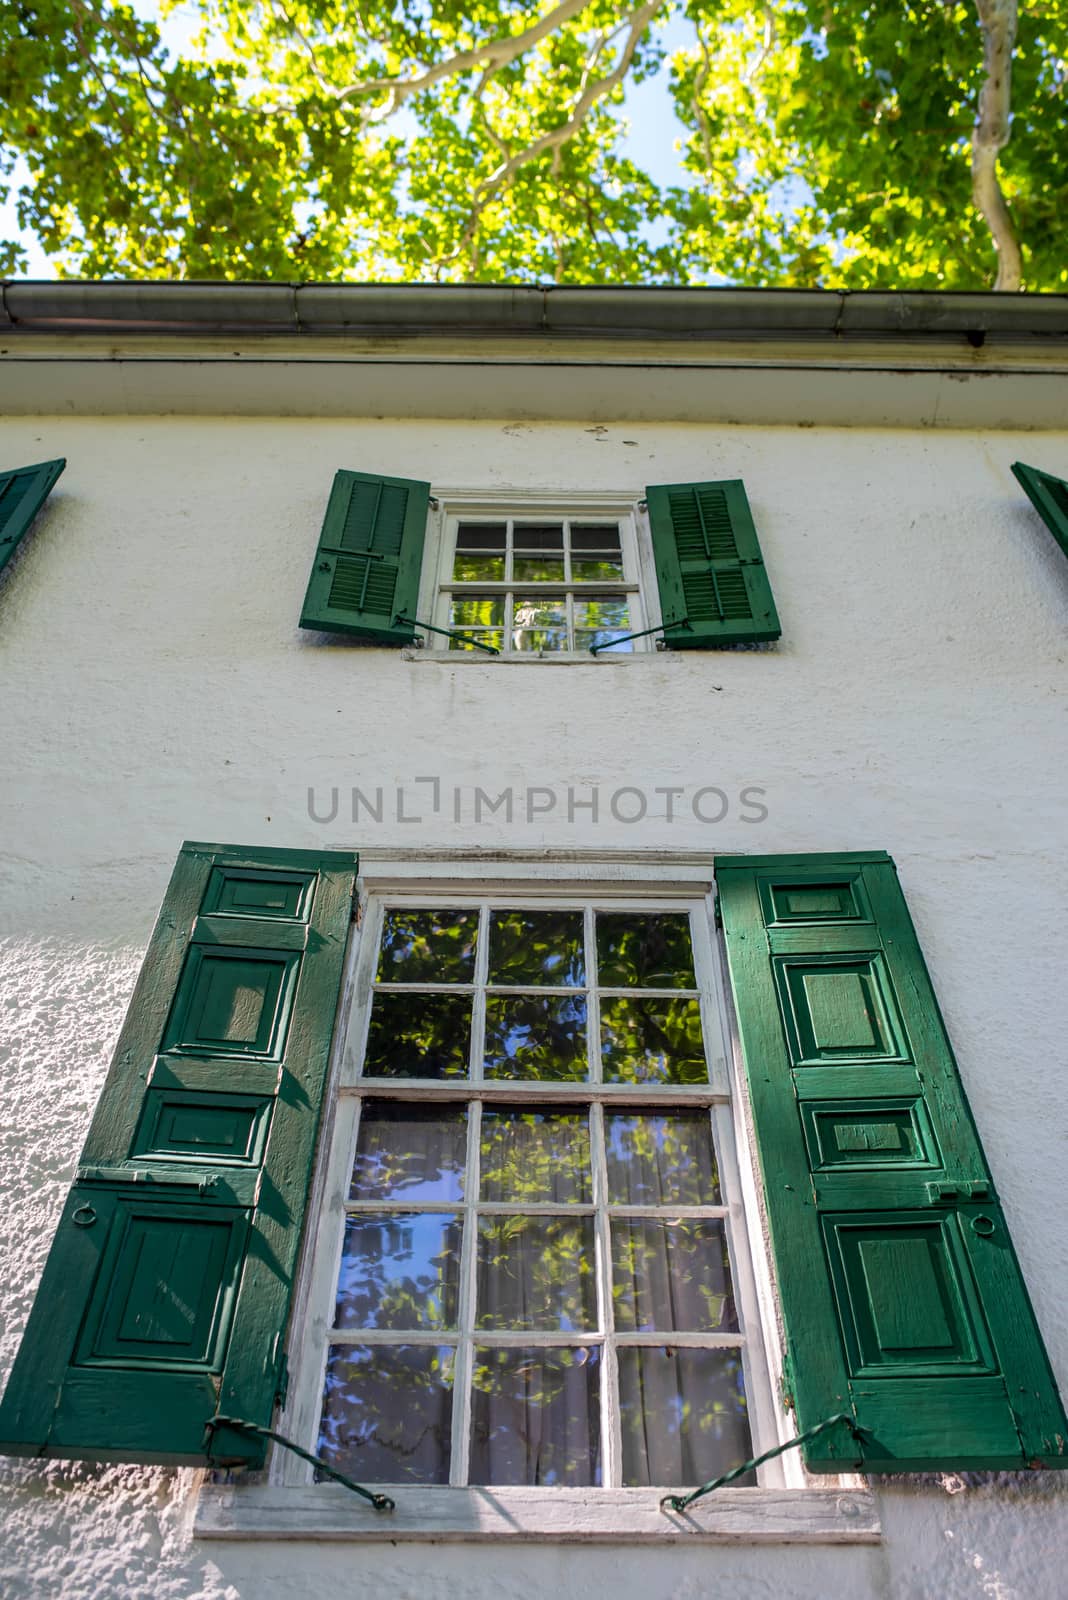 Historic colonial American home with beautiful woodwork and antique windows. Wooden dowel construction visible in frames, as well as wavy look of antique glass. Gorgeous 15-pane windows reflect the surrounding trees--with copy space.